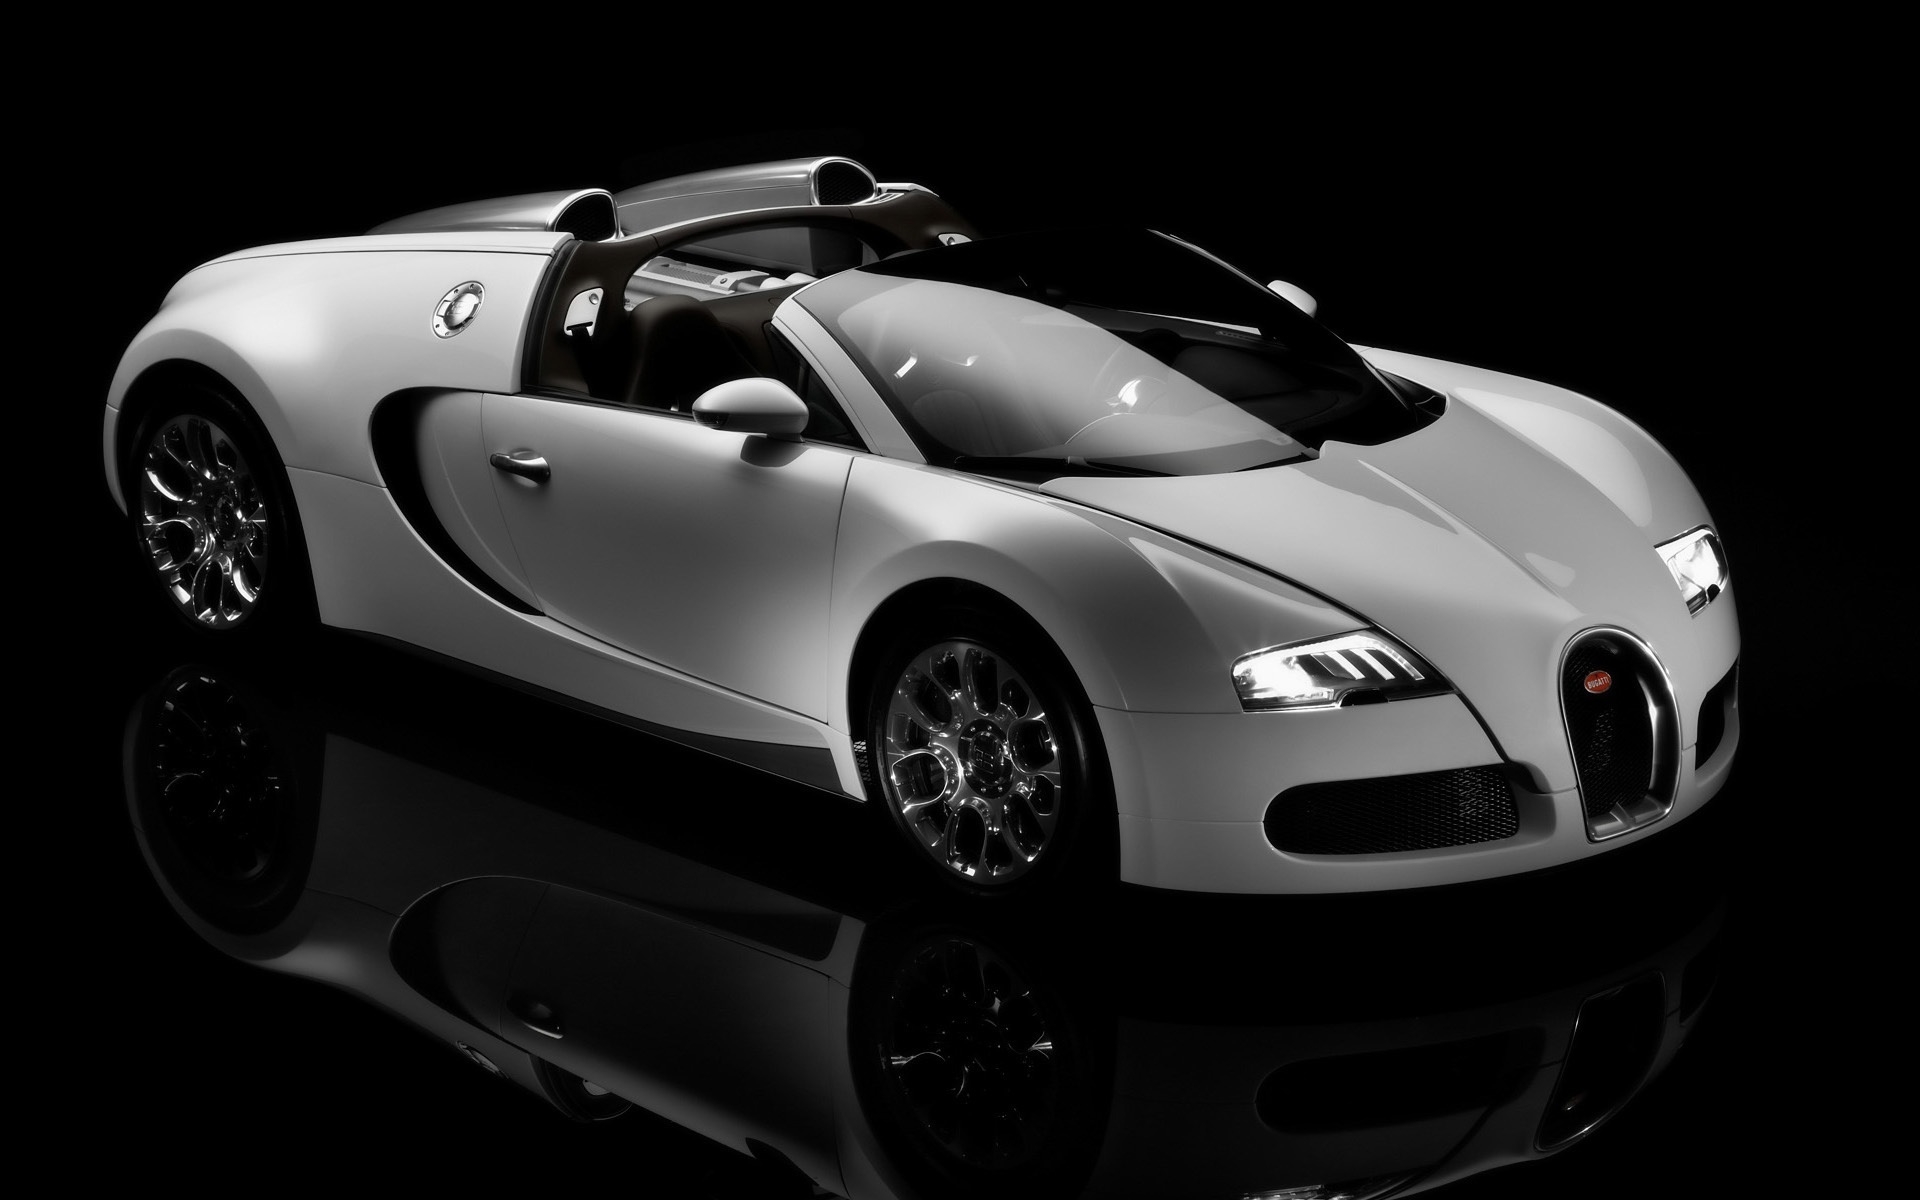 Bugatti Veyron 16.4 Grand Sport Production 2009 - Studio Front And Side for 1920 x 1200 widescreen resolution